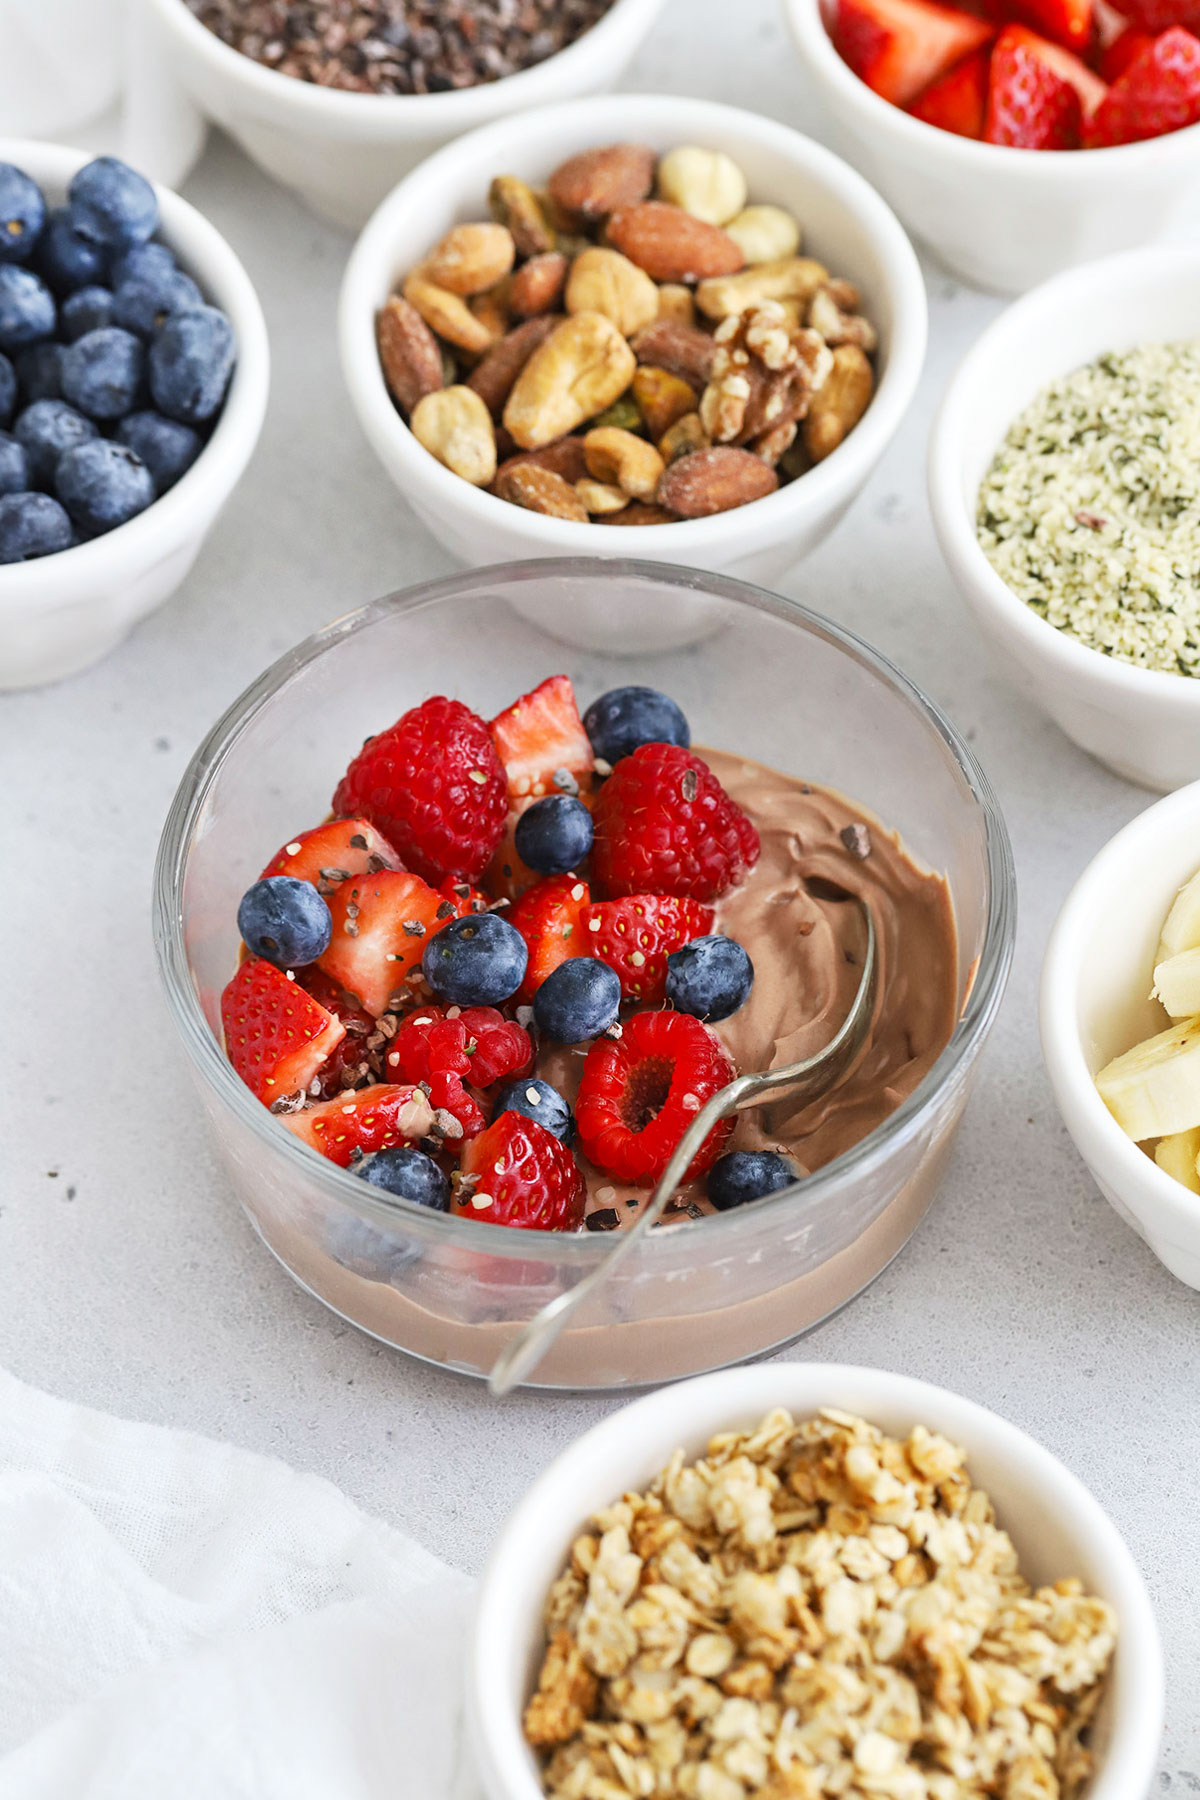 Adding toppings to chocolate protein yogurt bowls